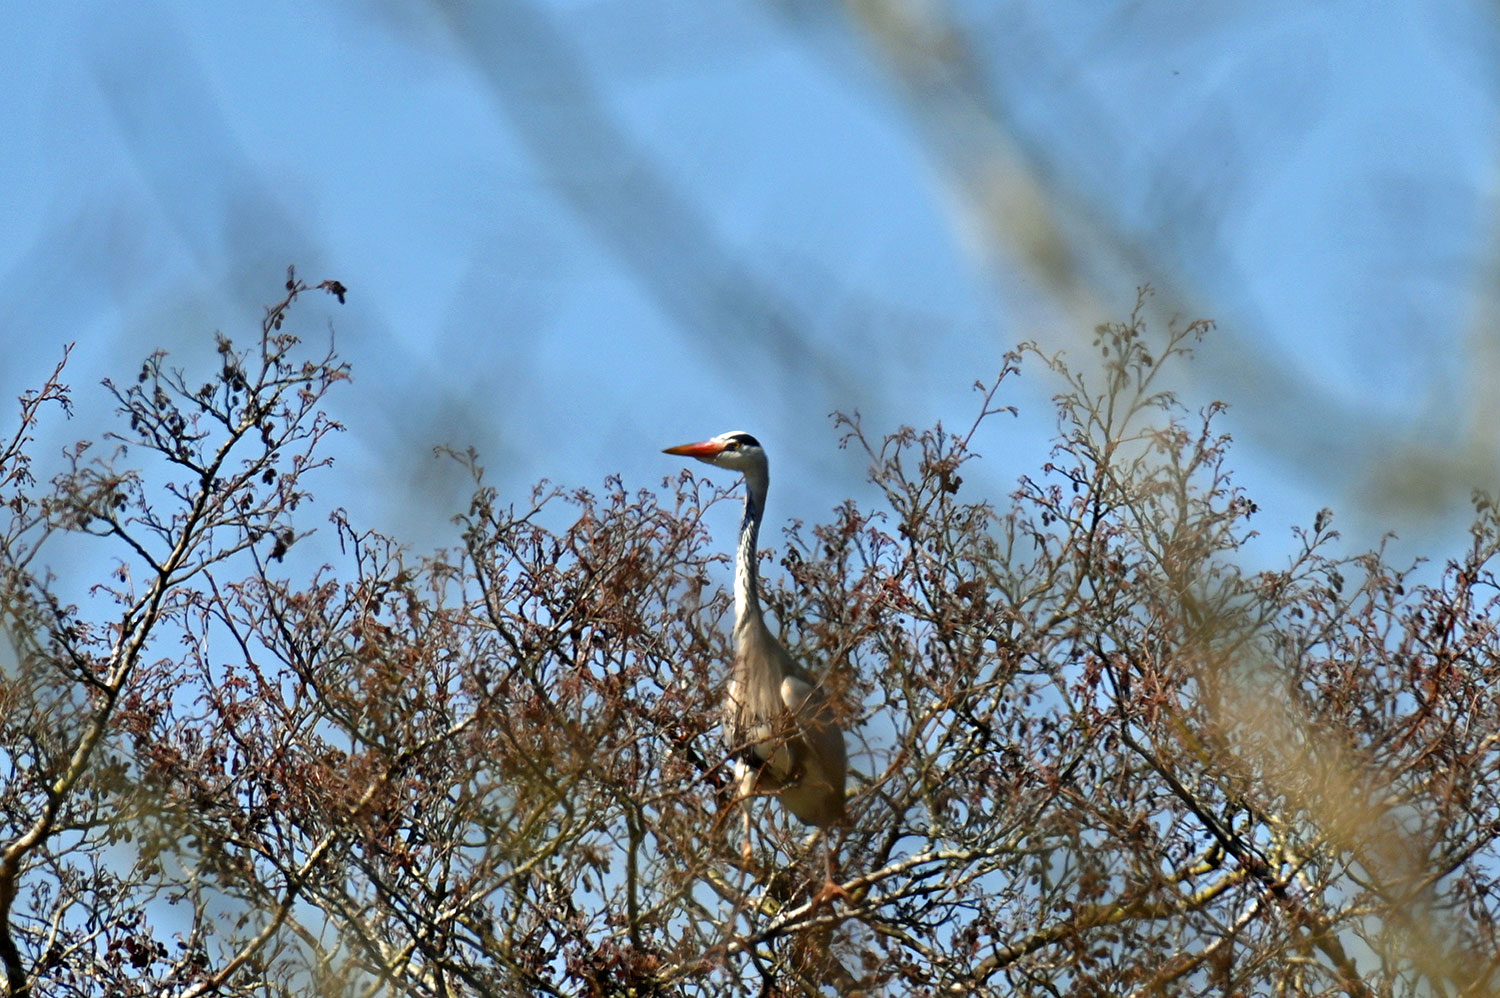 Heron in (and behind) distant trees